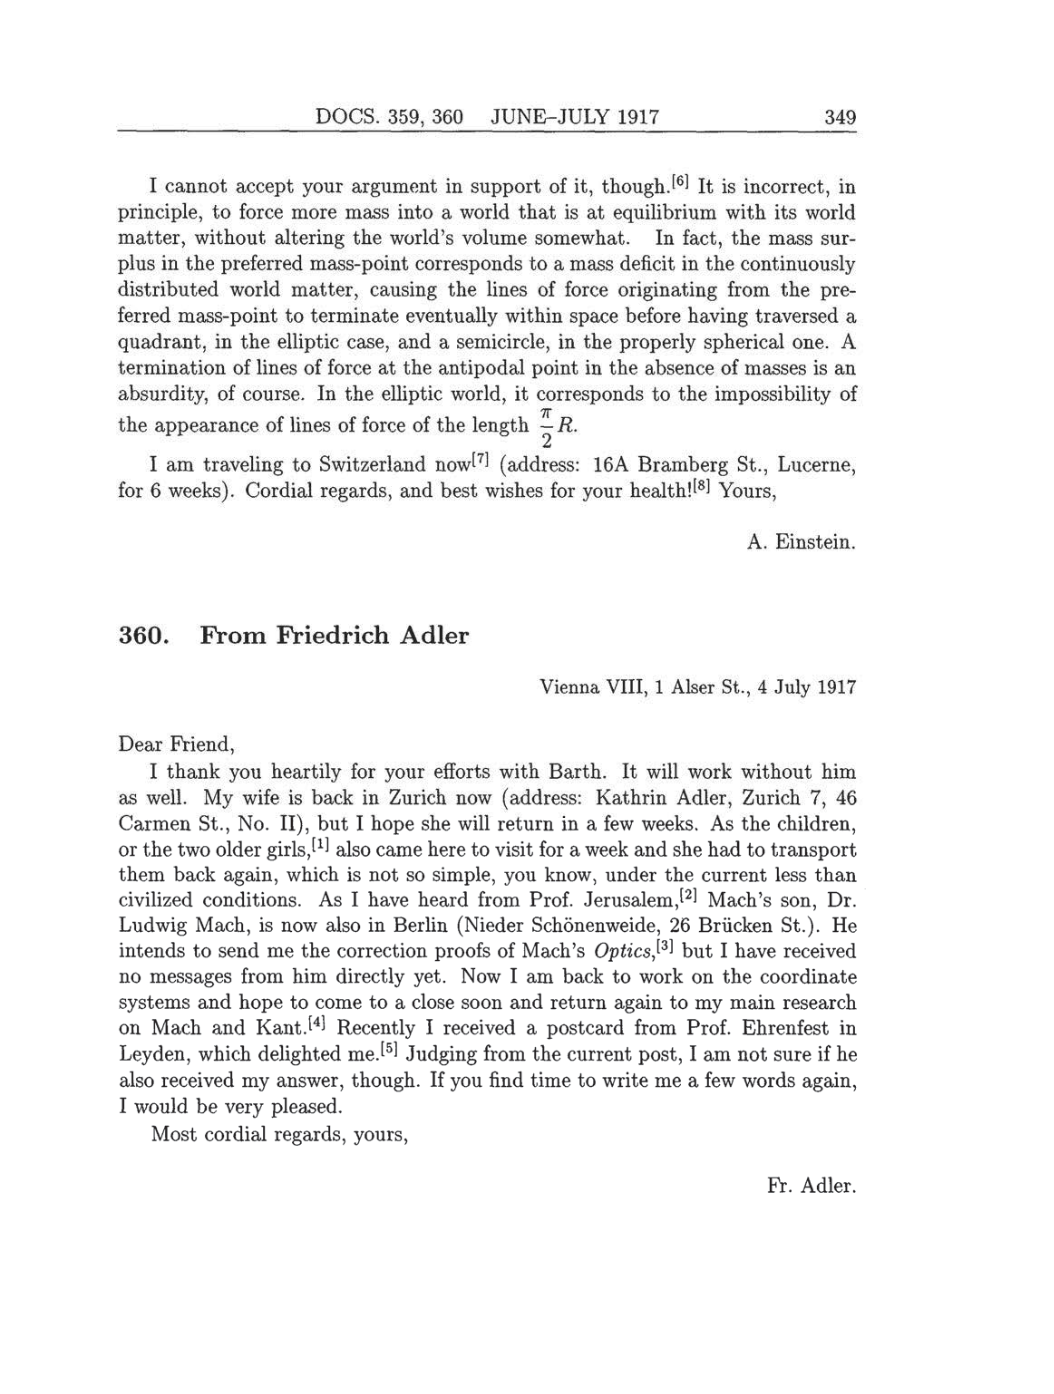 Volume 8: The Berlin Years: Correspondence, 1914-1918 (English translation supplement) page 349